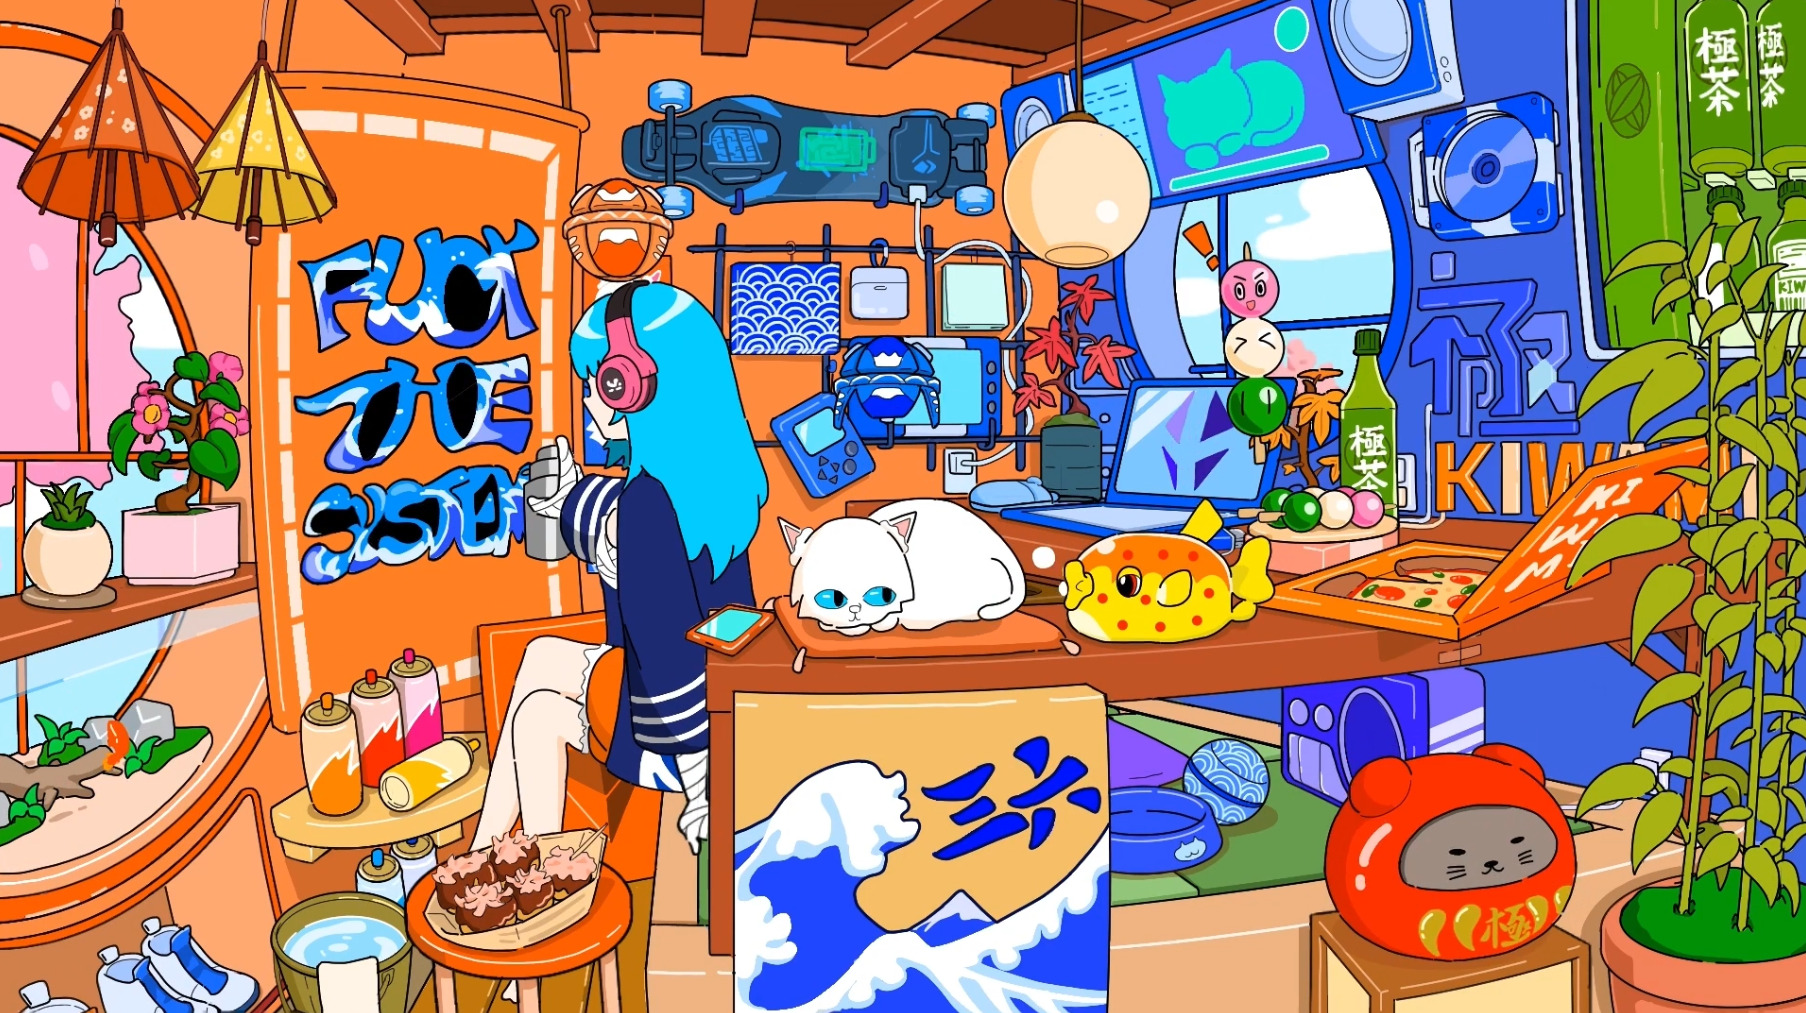 Hime's Room